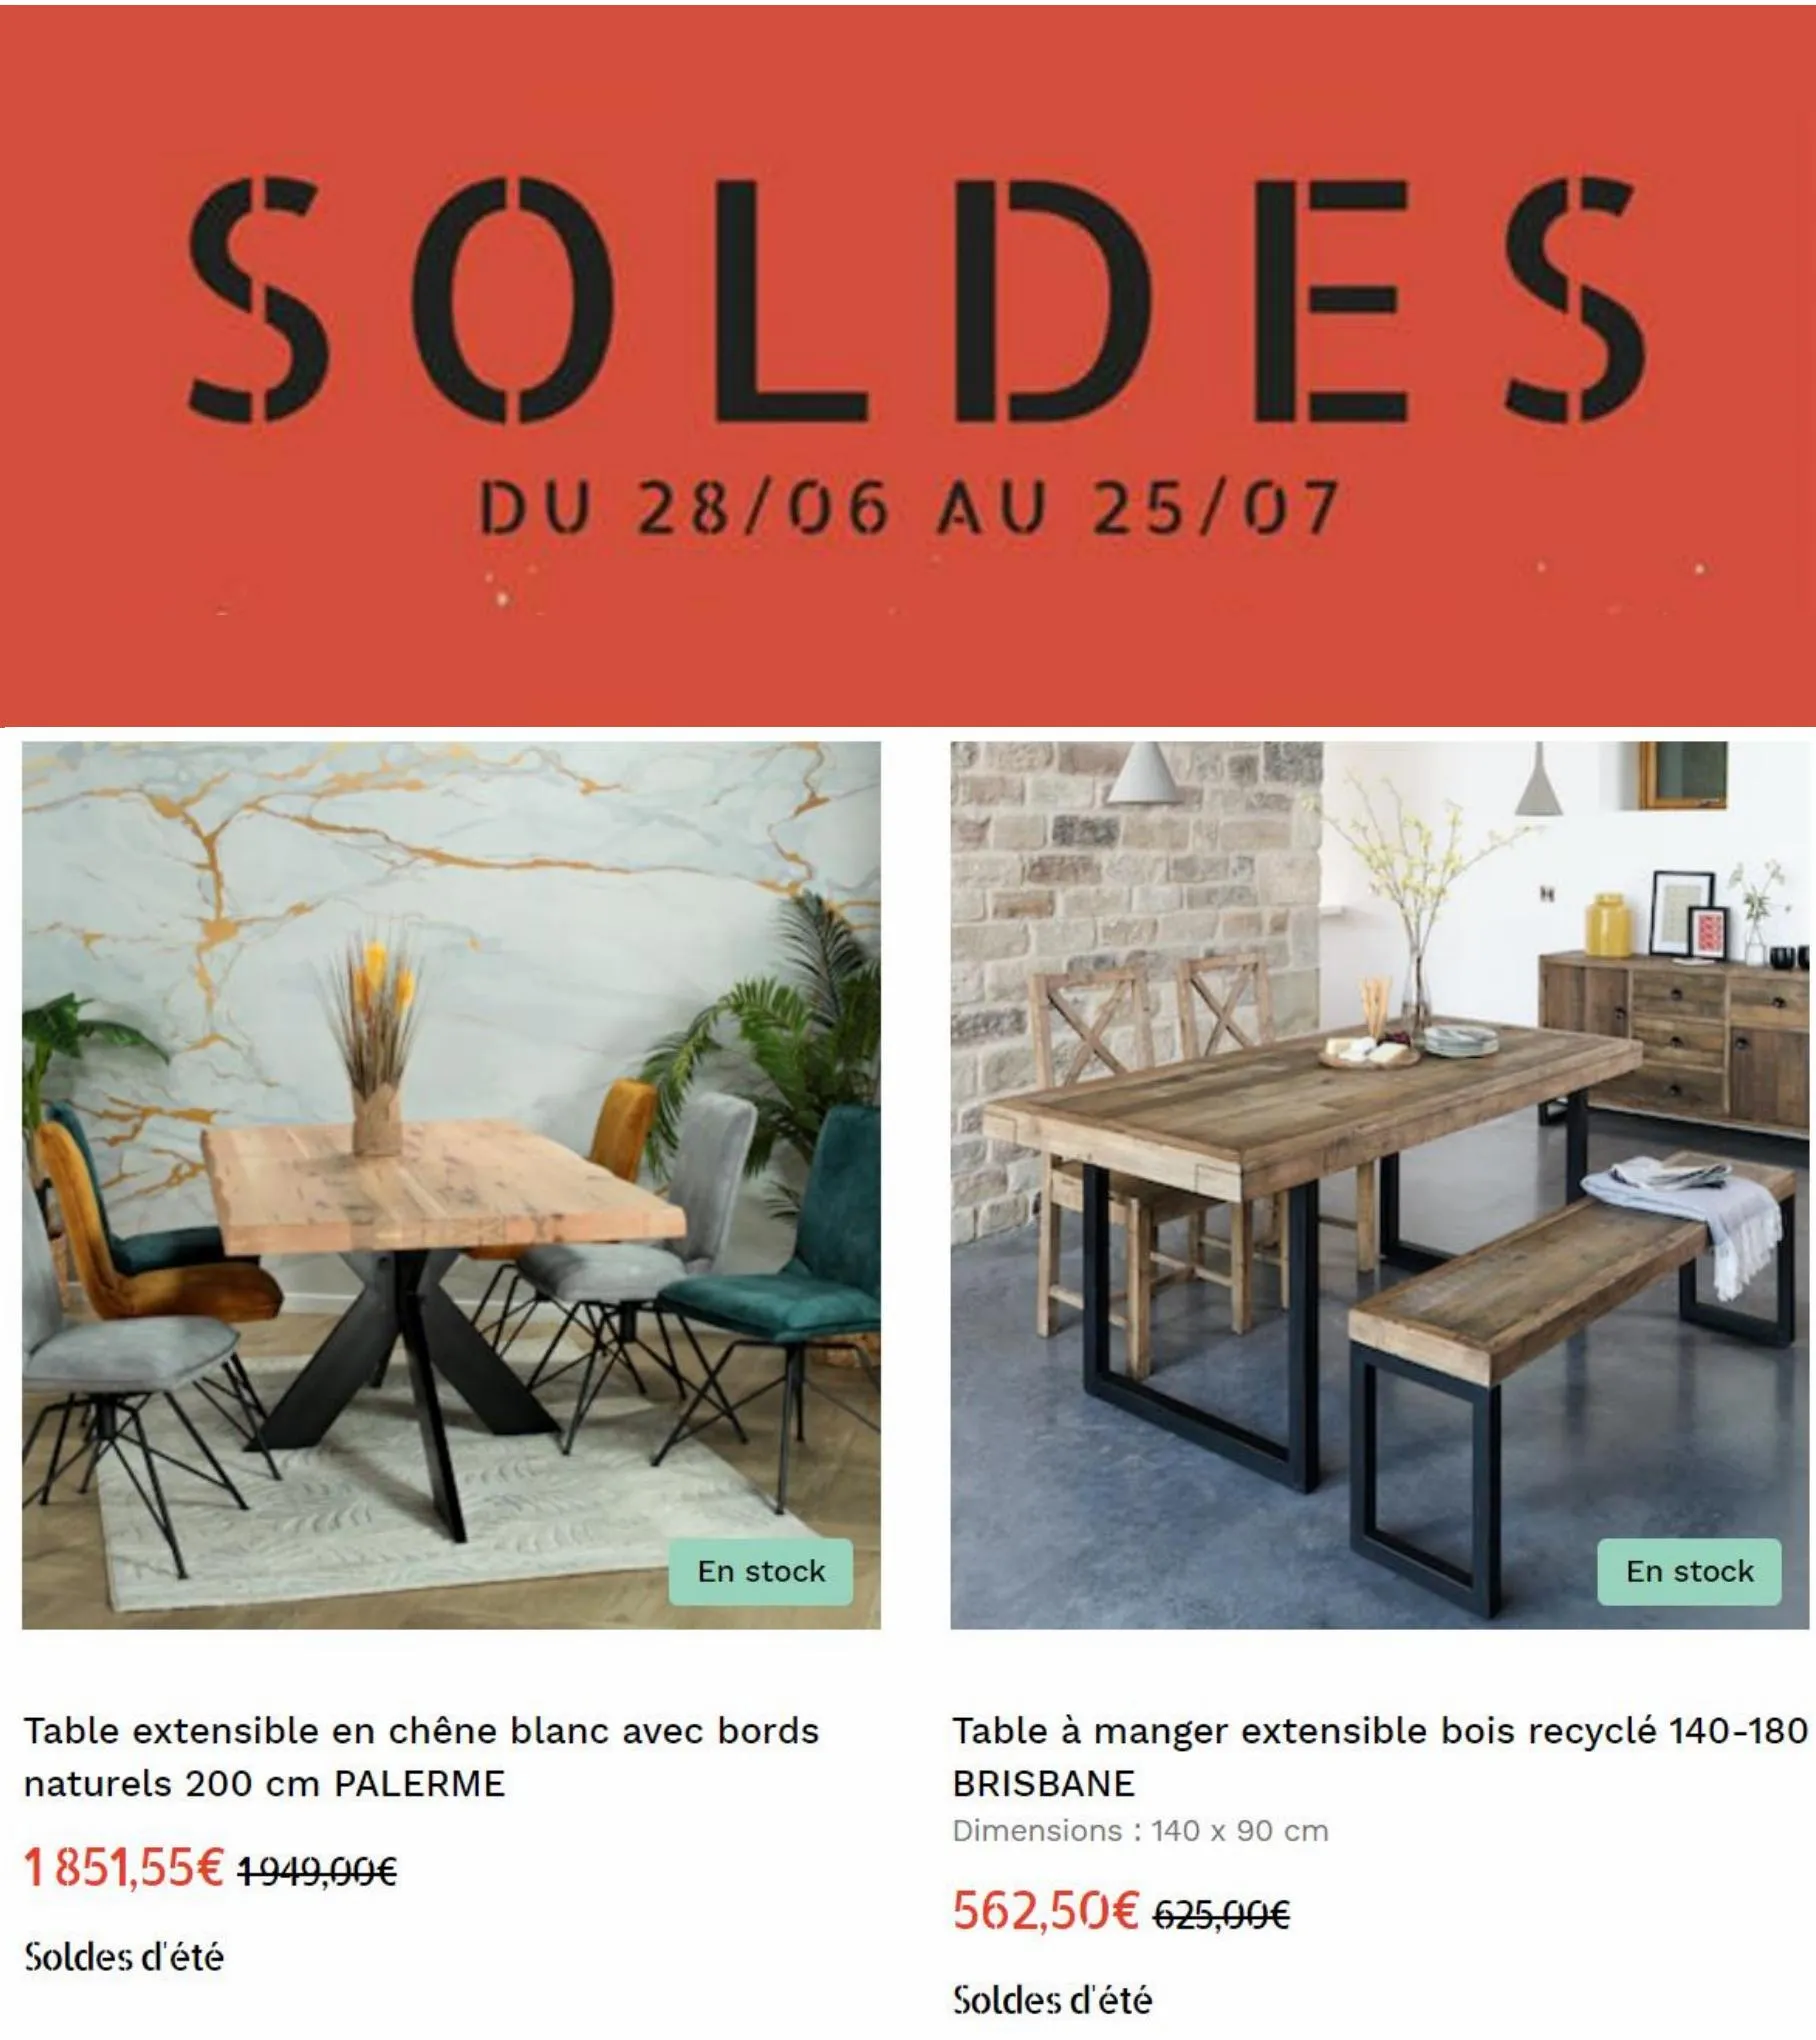 Catalogue Soldes, page 00006